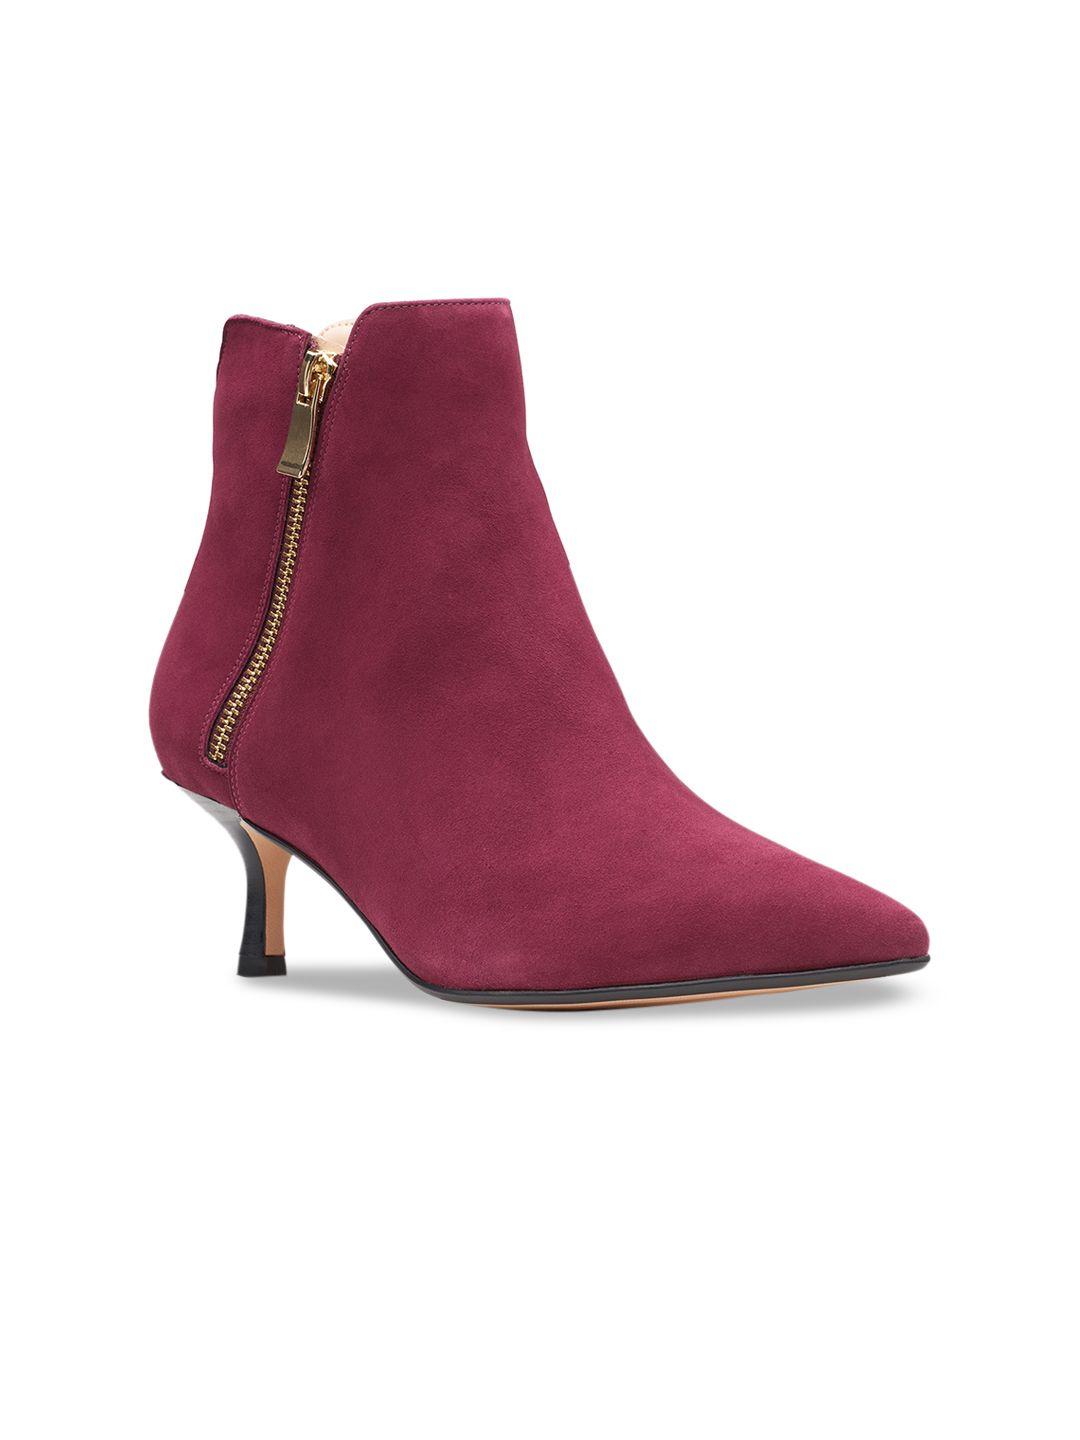 clarks-women-maroon-solid-casual-stiletto-boots